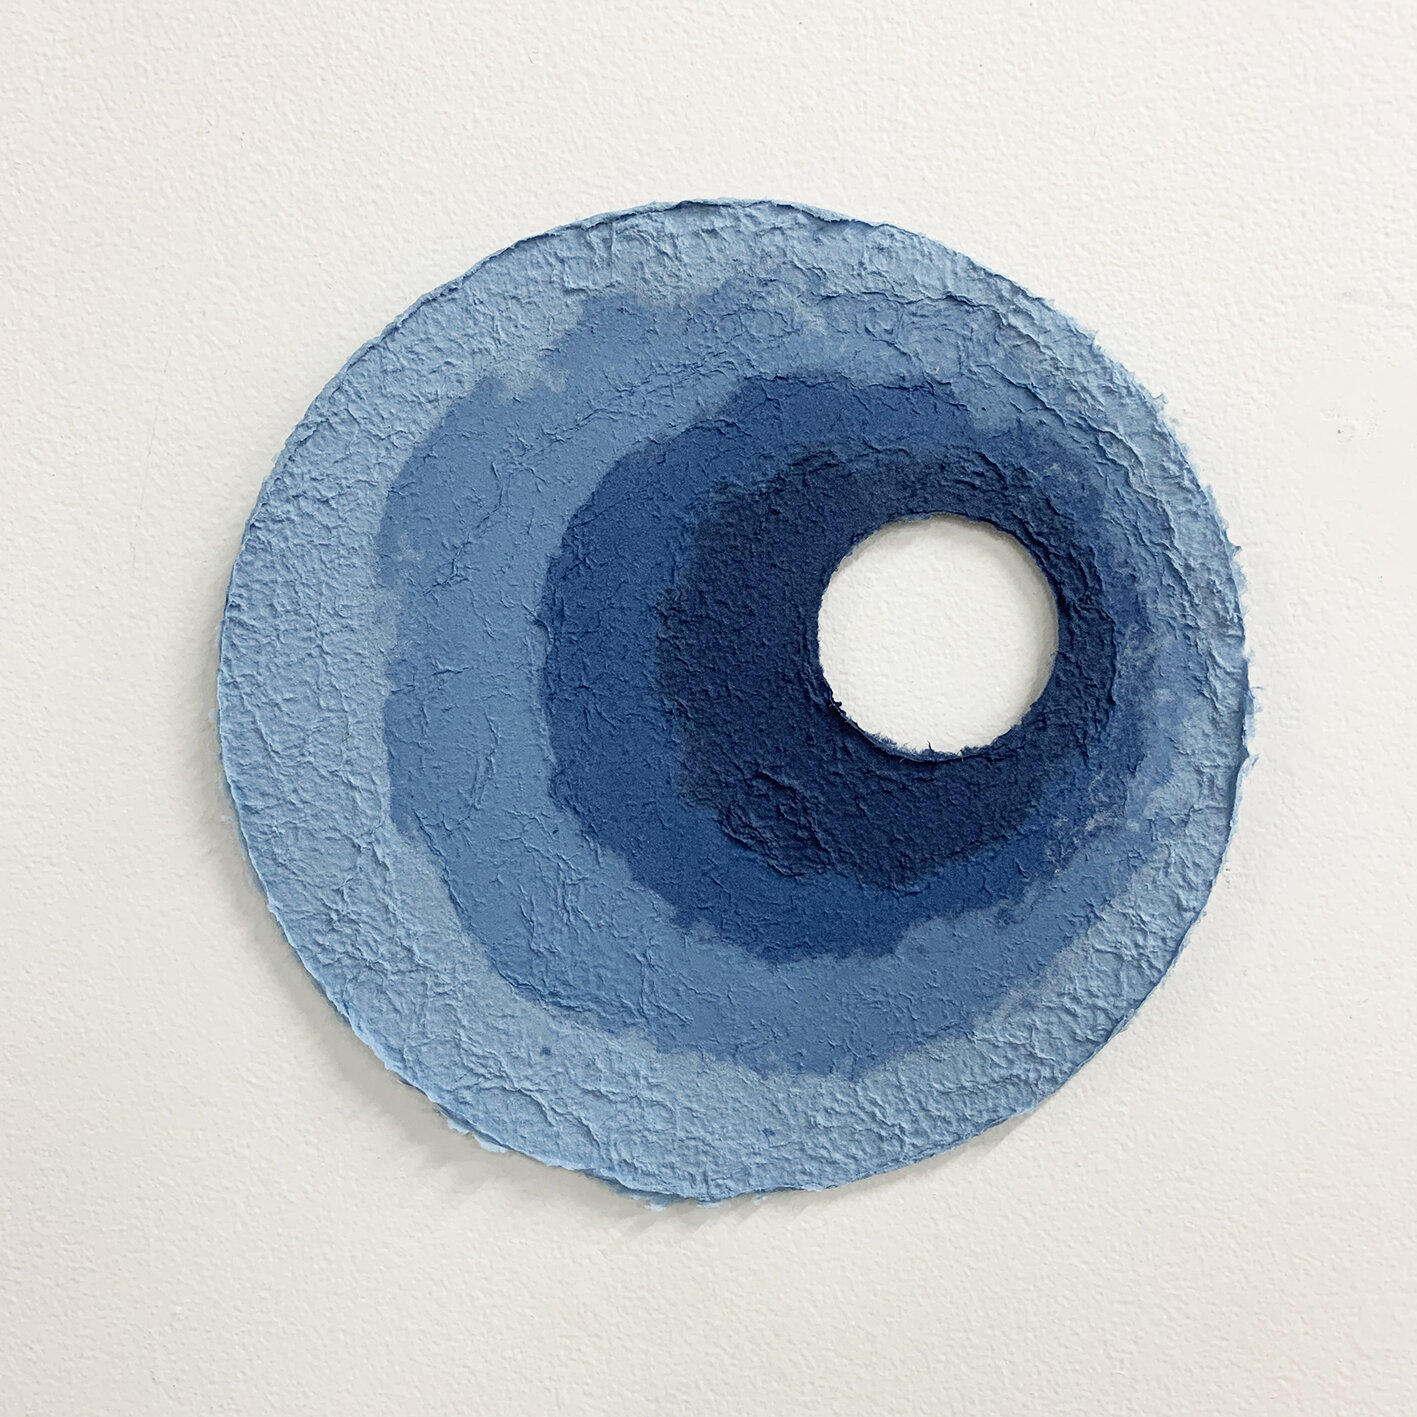    Softest hard  #5,  2020.   Hand-made paper, from indigo-dyed salvaged textiles (cotton bedsheets). 40cm x 40cm 